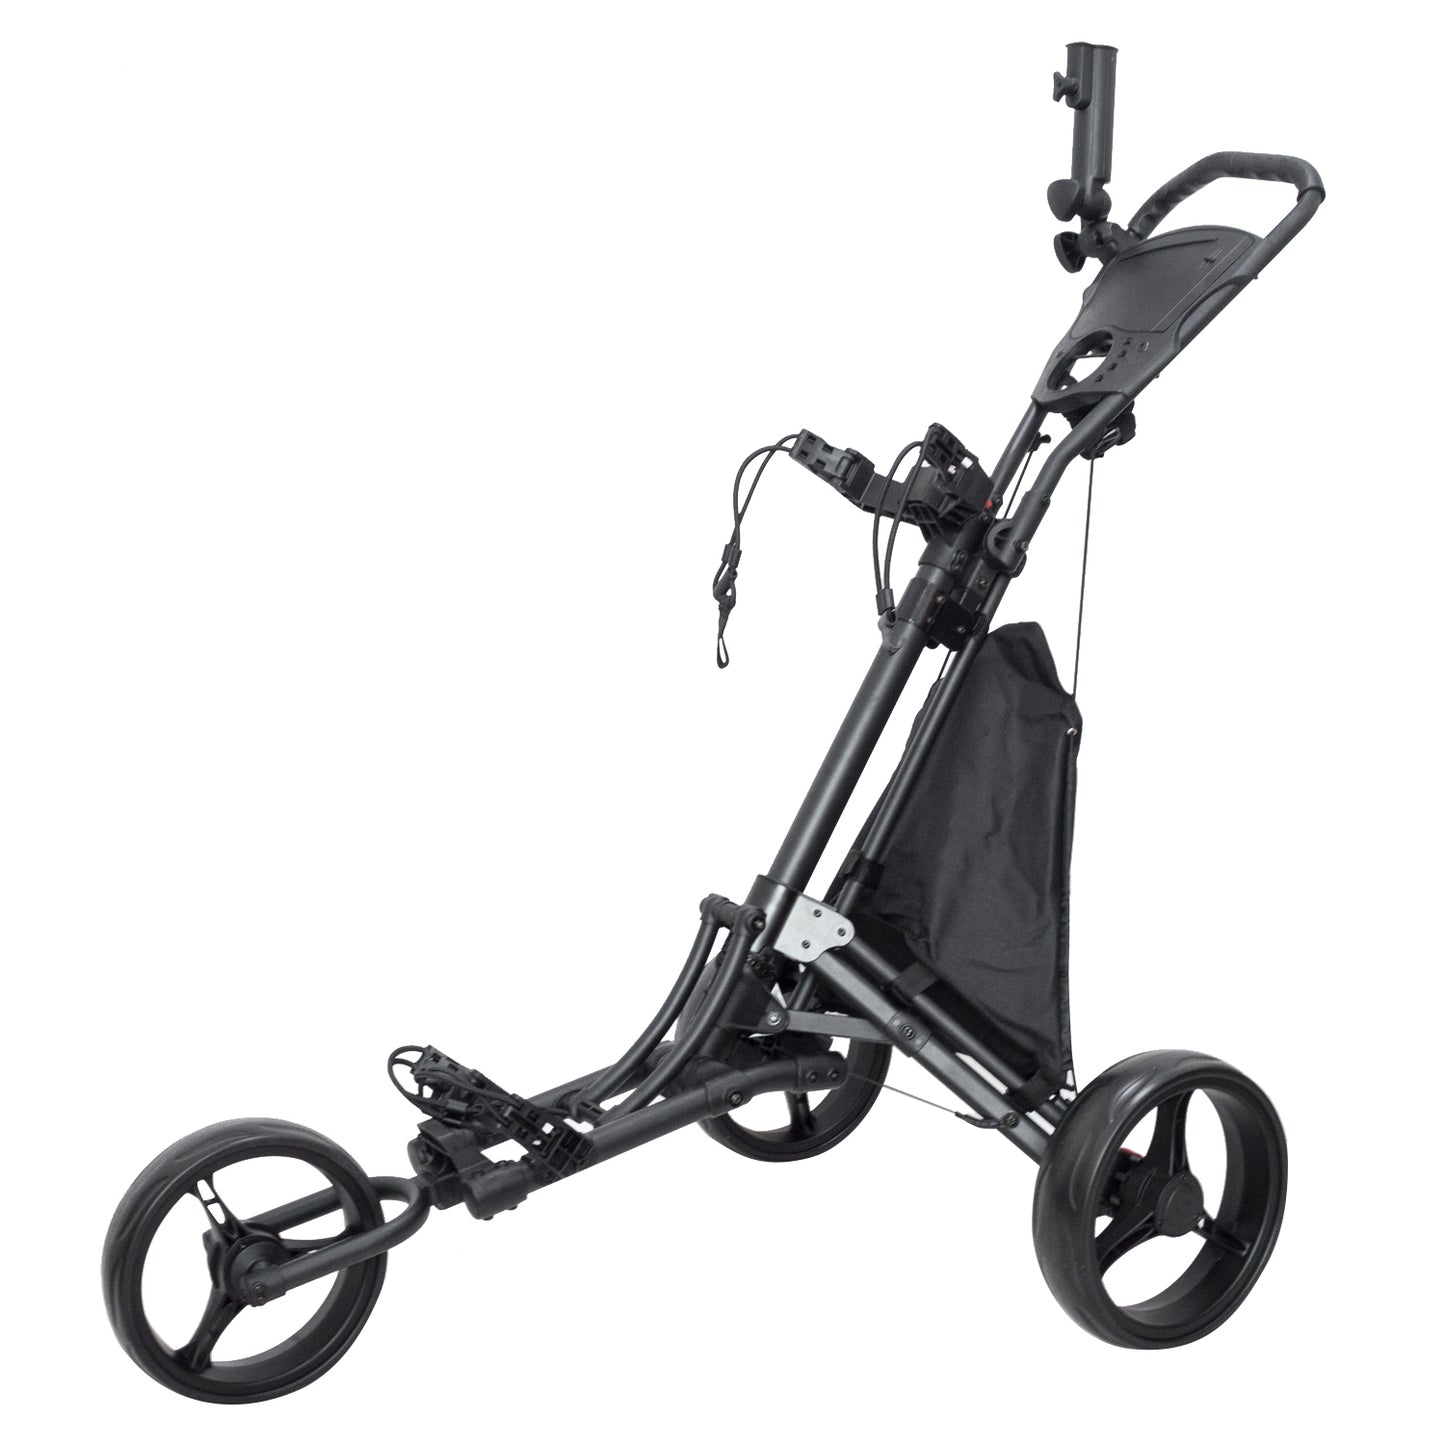 One click 3 wheel push trolley with umbrella holder， competitor folding size